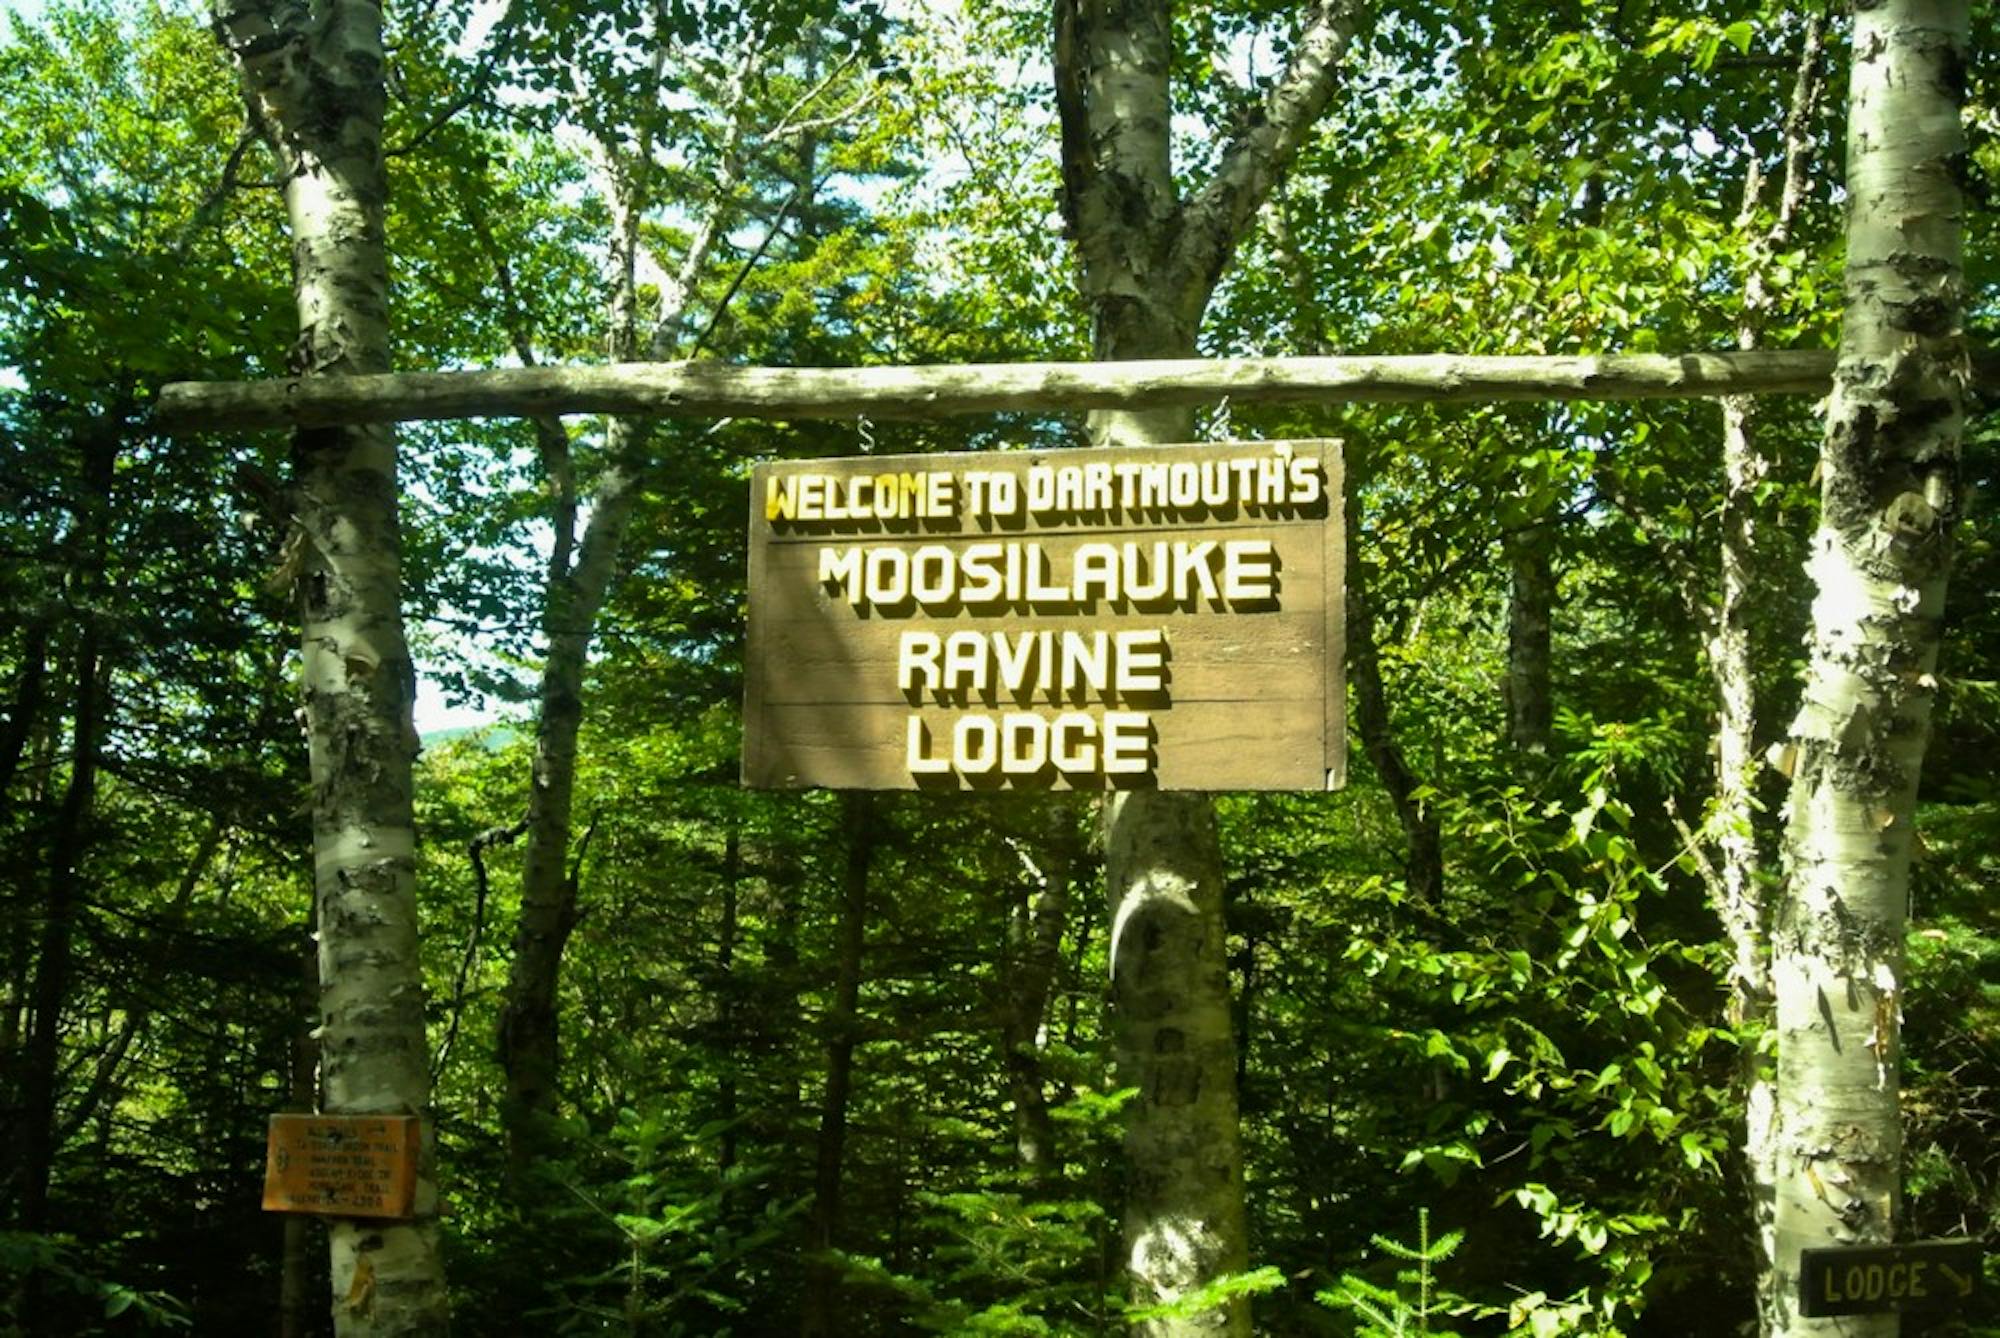 All Trips end at the Moosilauke Ravine Lodge, fondly known as the Lodj.